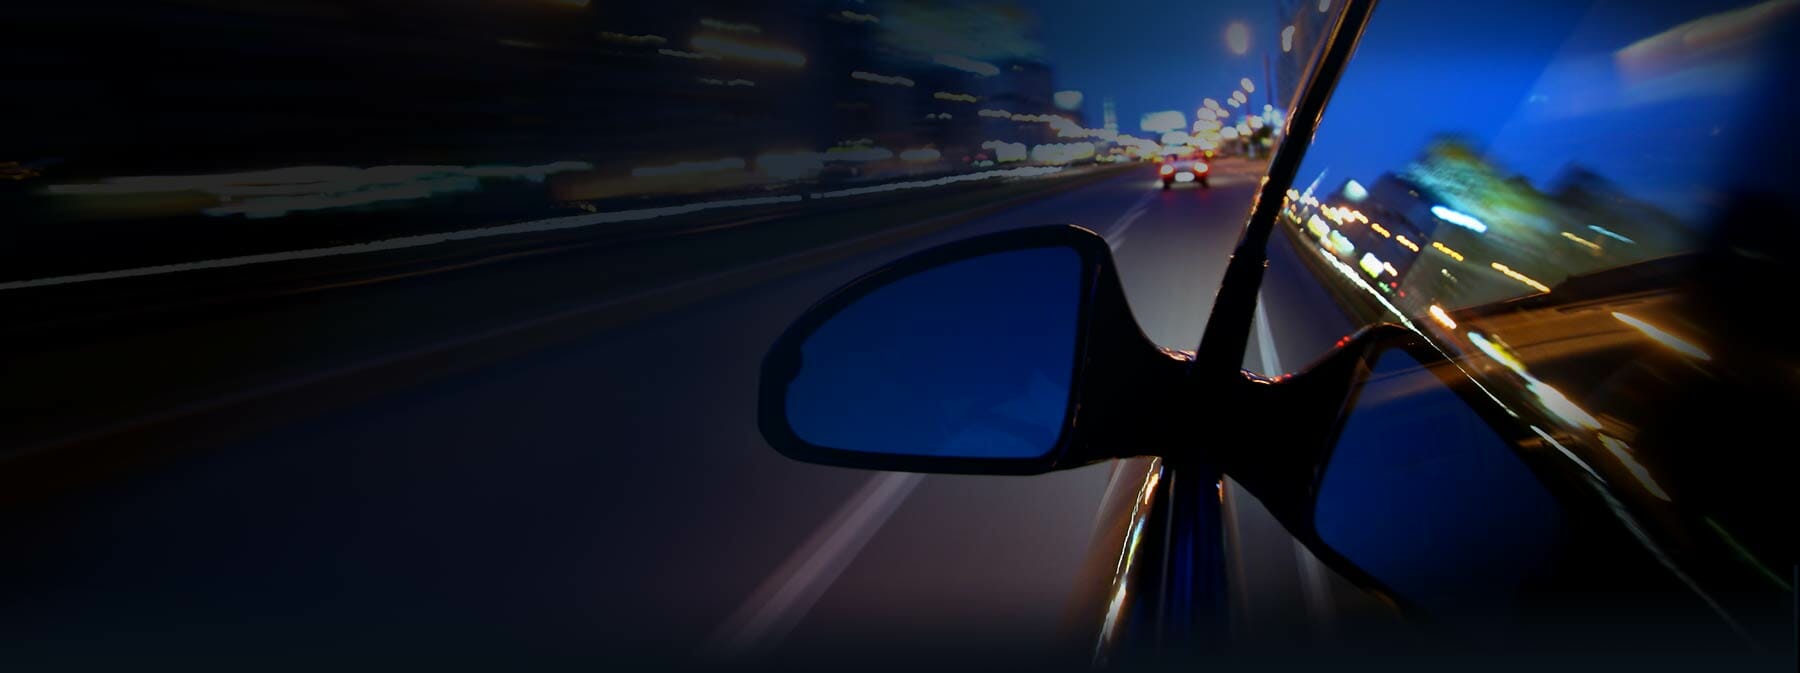 Car Driving at Night | Car Accident Attorney